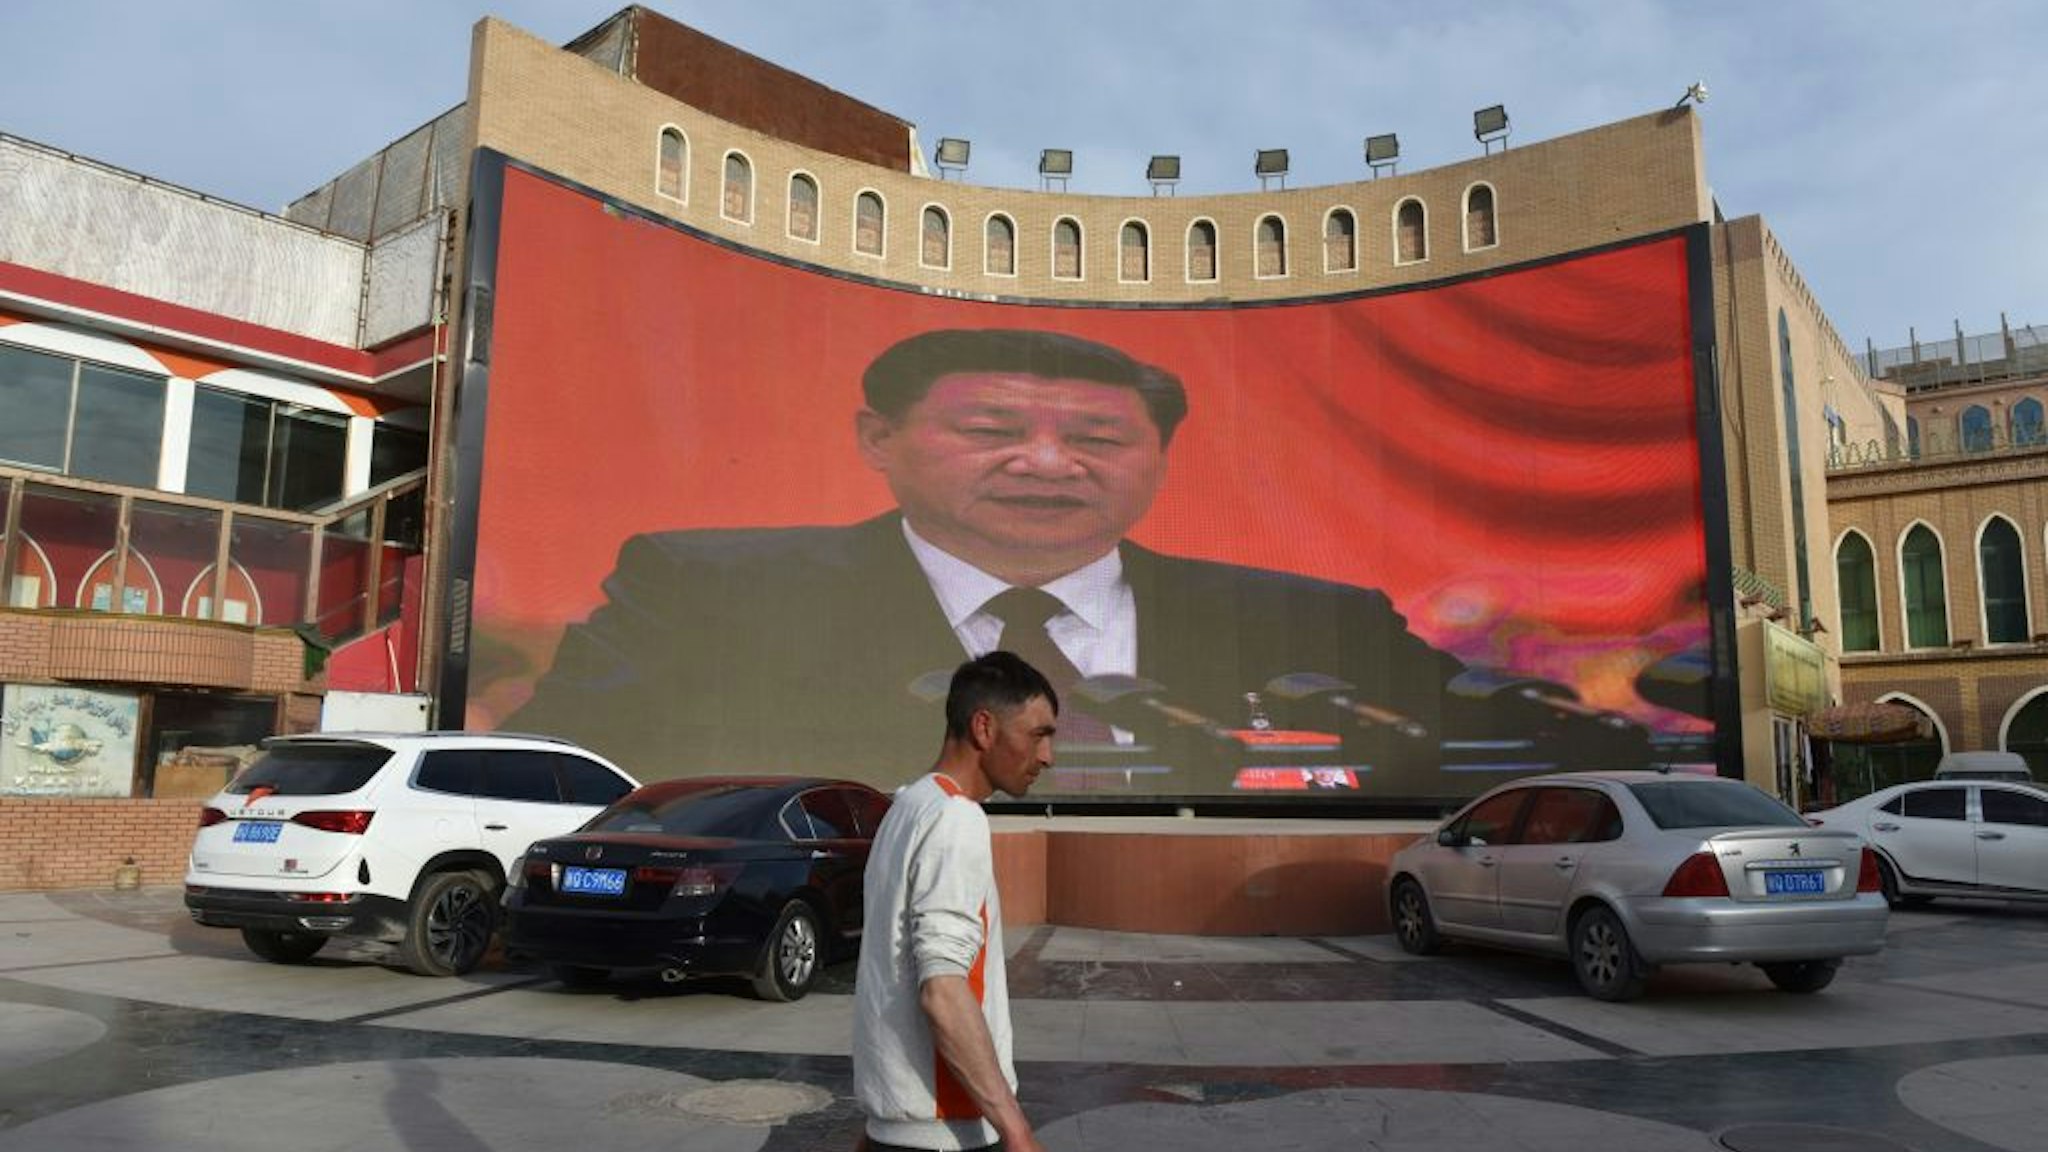 This photo taken on June 4, 2019 shows a man walking past a screen showing images of China's President Xi Jinping in Kashgar in China's northwest Xinjiang region. - China has enforced a massive security crackdown in Xinjiang, where more than one million ethnic Uighurs and other mostly Muslim minorities are believed to be held in a network of internment camps that Beijing describes as "vocational education centres" aimed at steering people away from religious extremism. (Photo by Greg Baker / AFP) (Photo credit should read GREG BAKER/AFP via Getty Images)